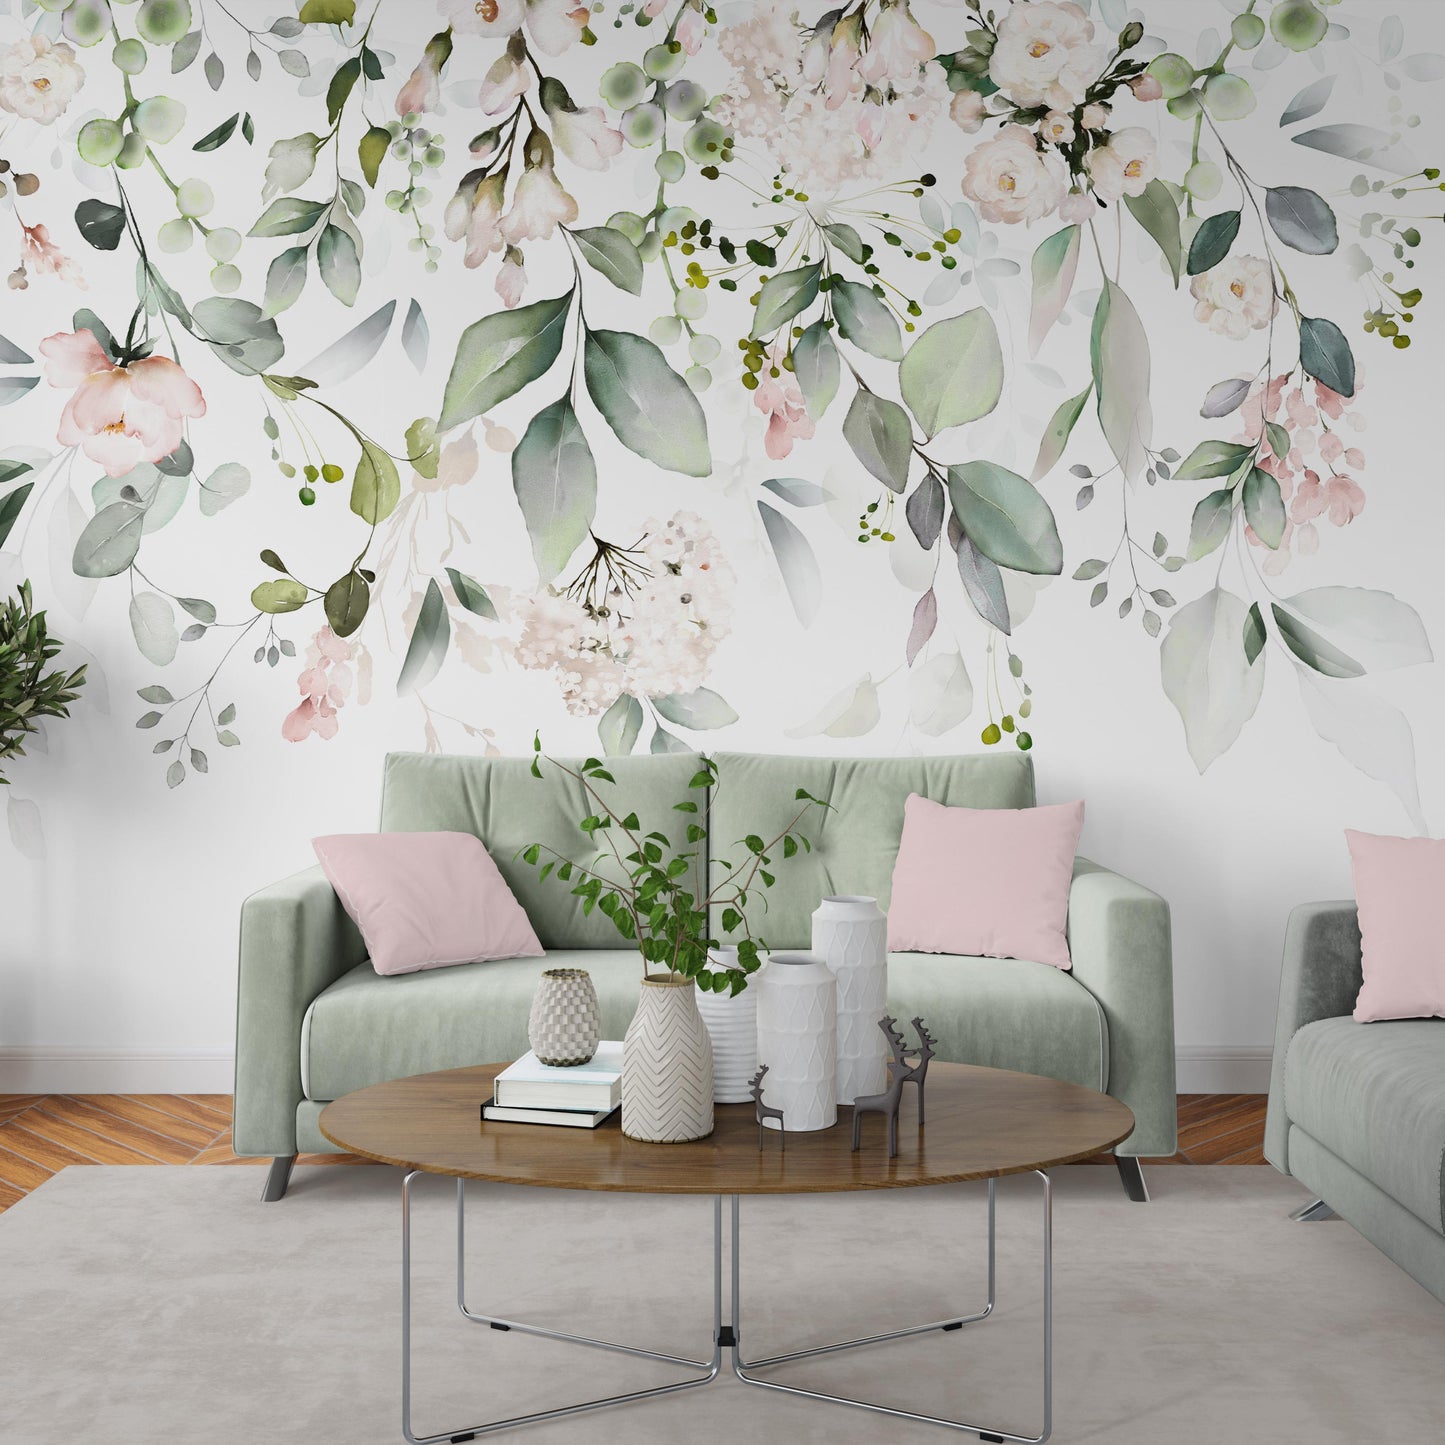 Living Room with Sage Green Couch and Pale Pink Pillows:  Statement sage green botanical wallpaper harmonizes with sage green couch and pale pink pillows in living room.